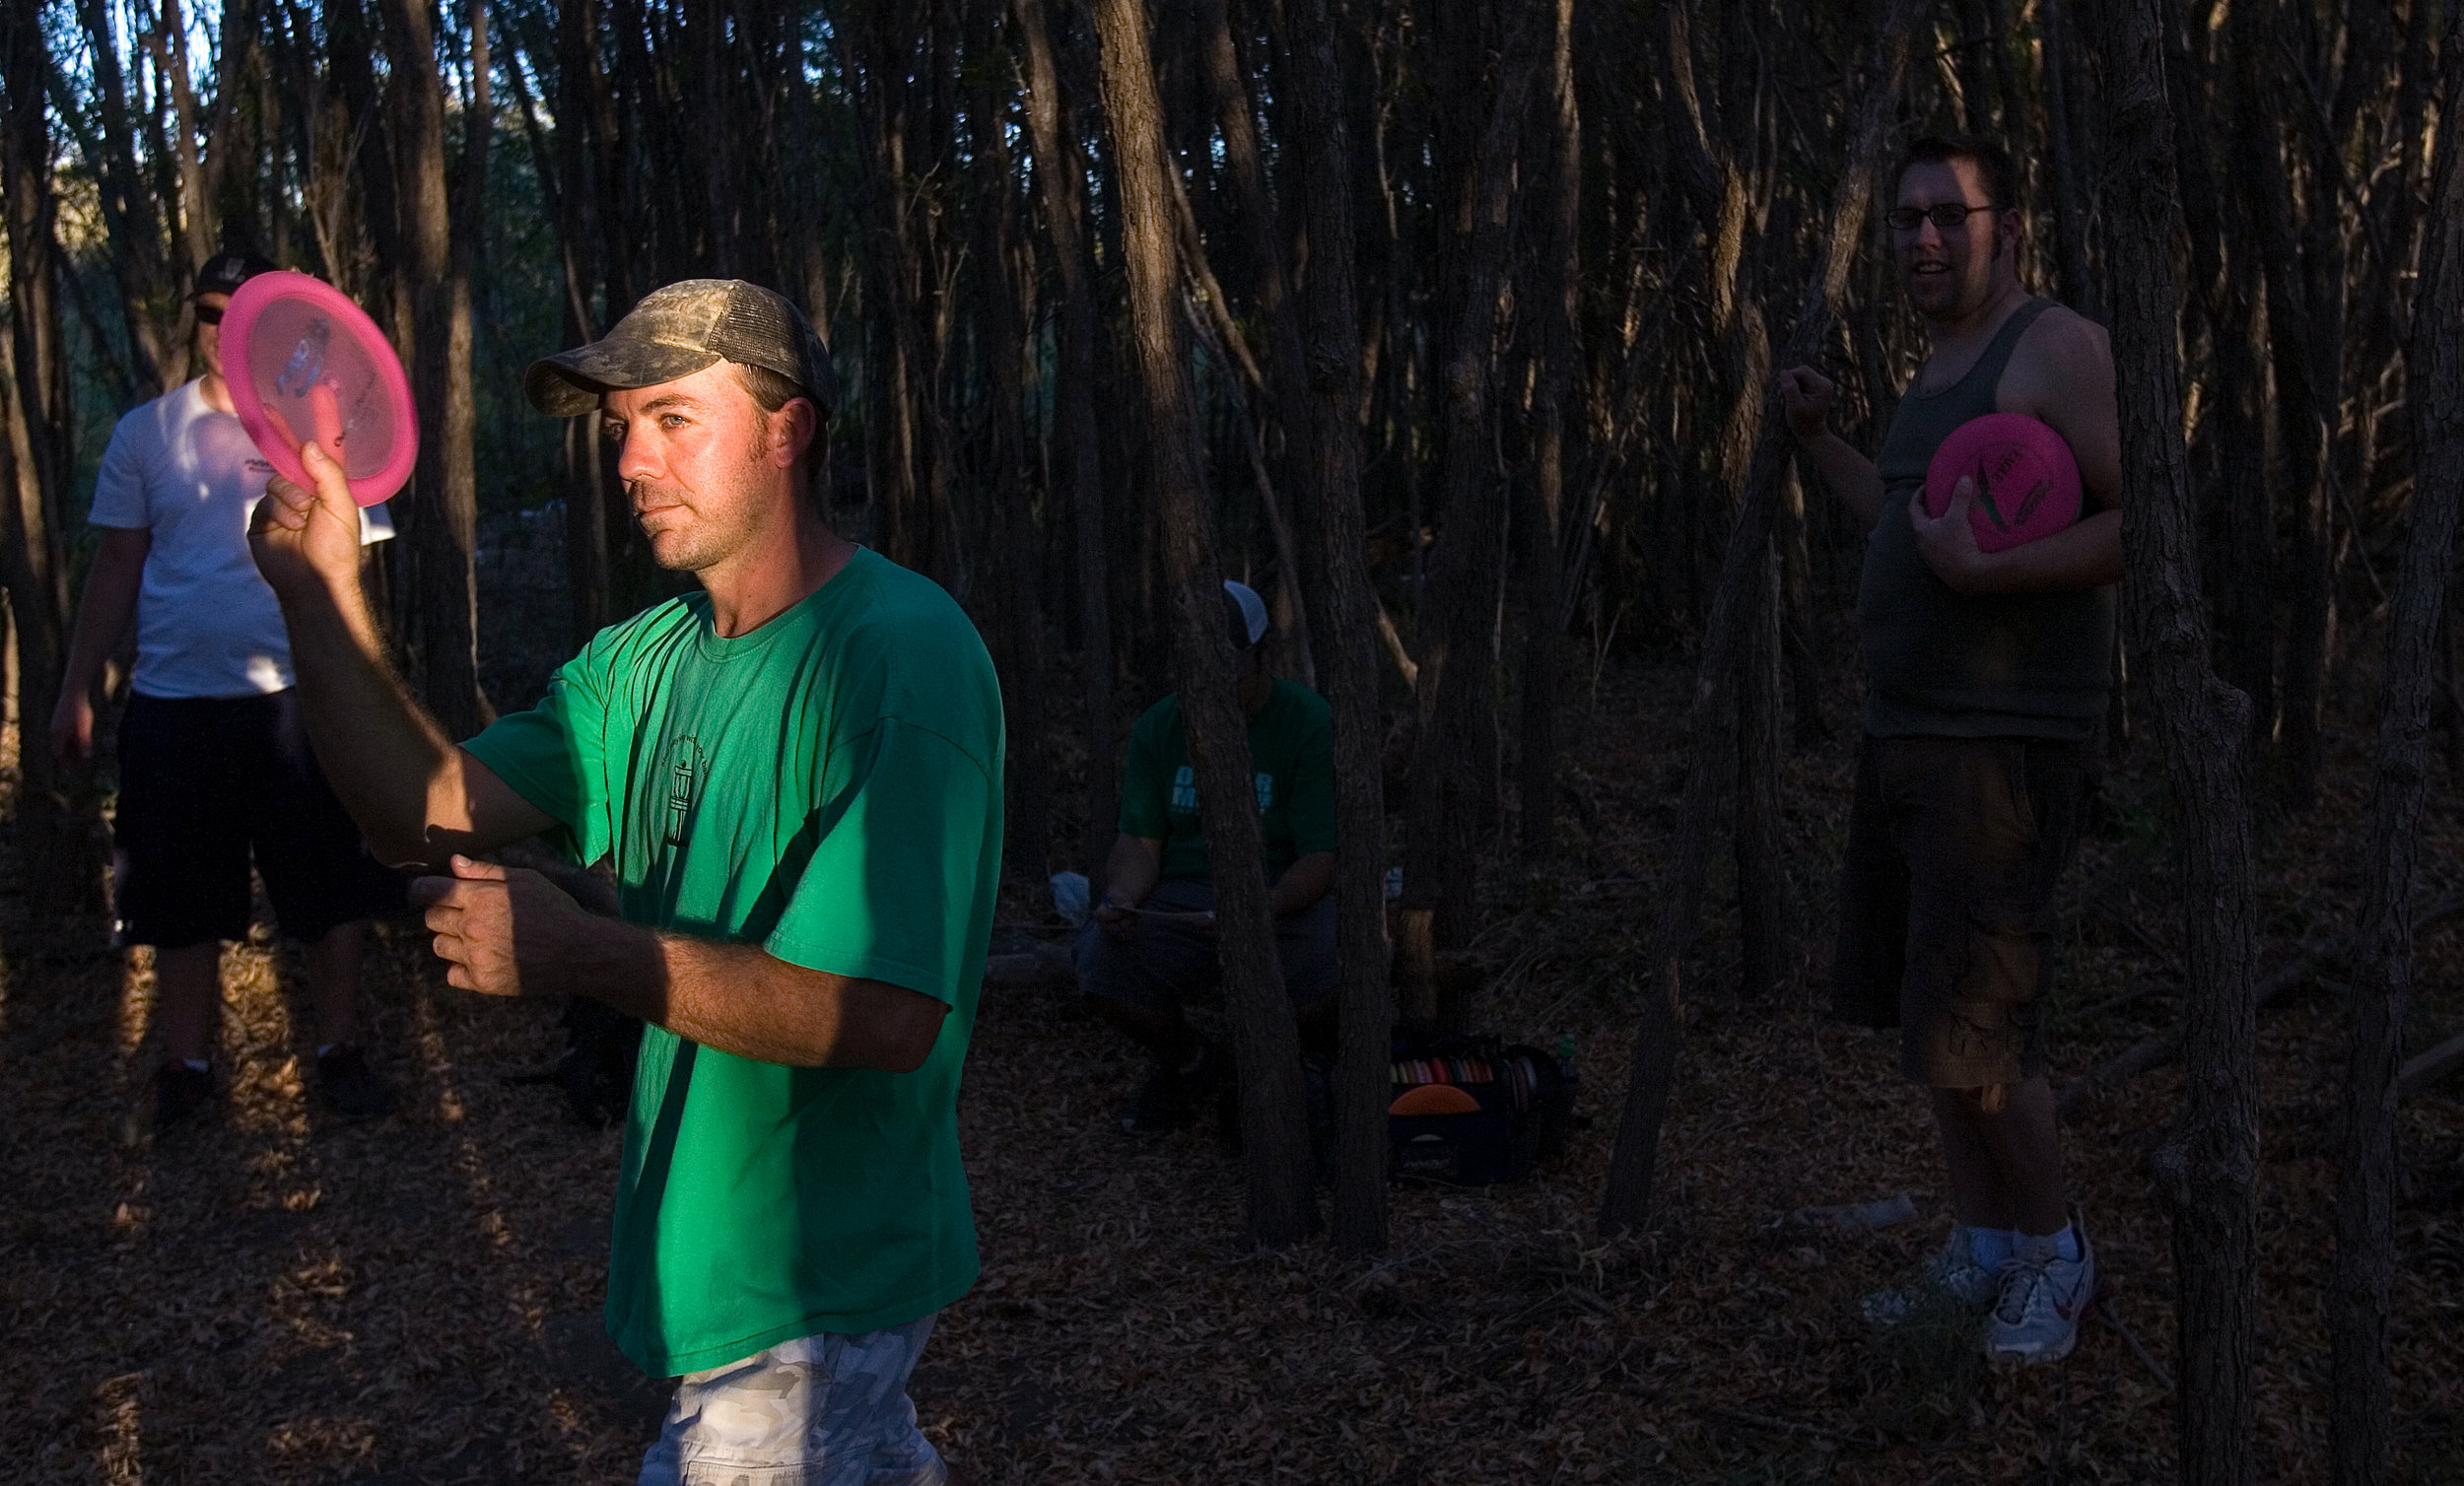  Bobby Baird, foreground, lines up a throw as Nick Cookman, background from left, Anthouny Aguirre and Clint Reefschneider watch during a disc golf mini-tournament Wednesday at Comanche Trail Park. Baird said their group of players is usually out at 